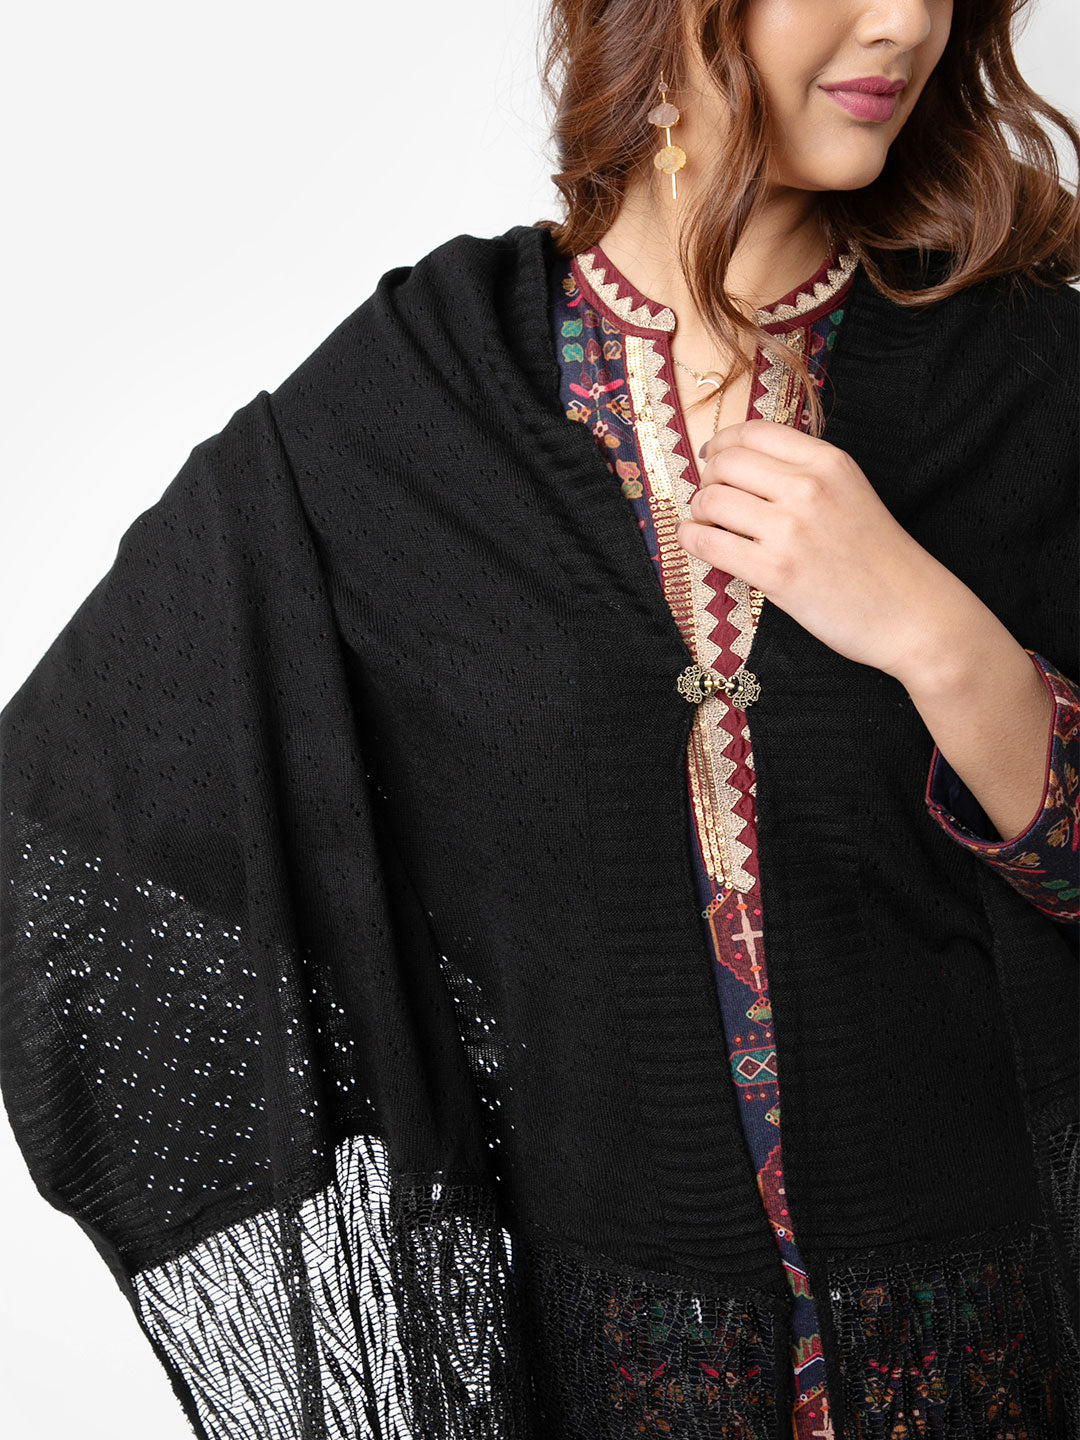 Black Solid Knitted Shawl